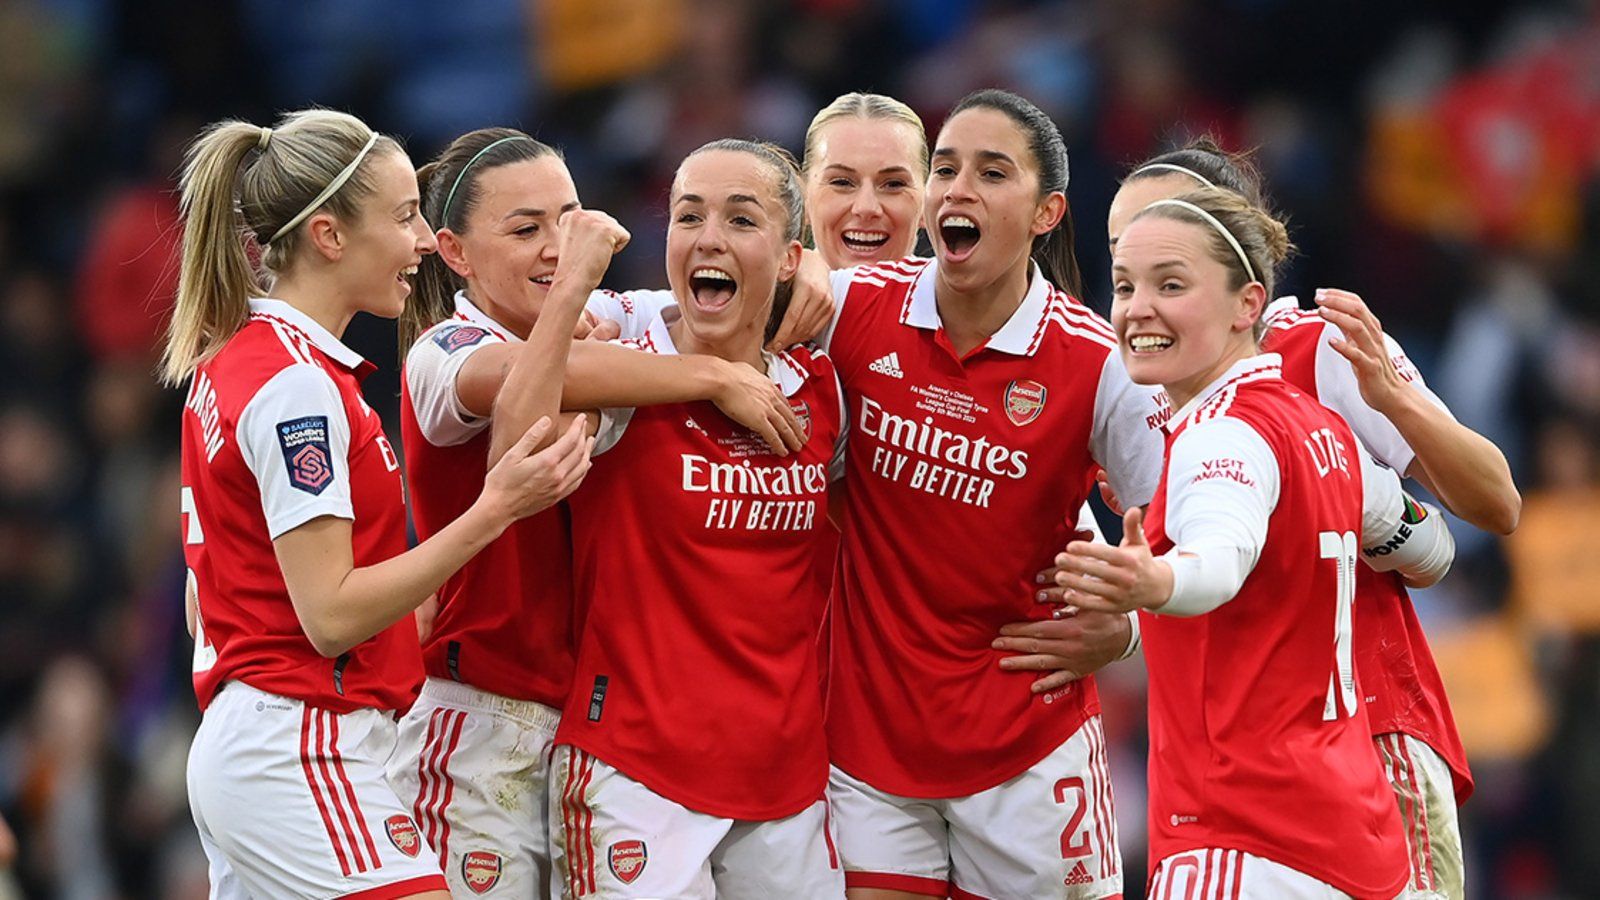 Watch our match against Liverpool Women live! | News | Arsenal.com